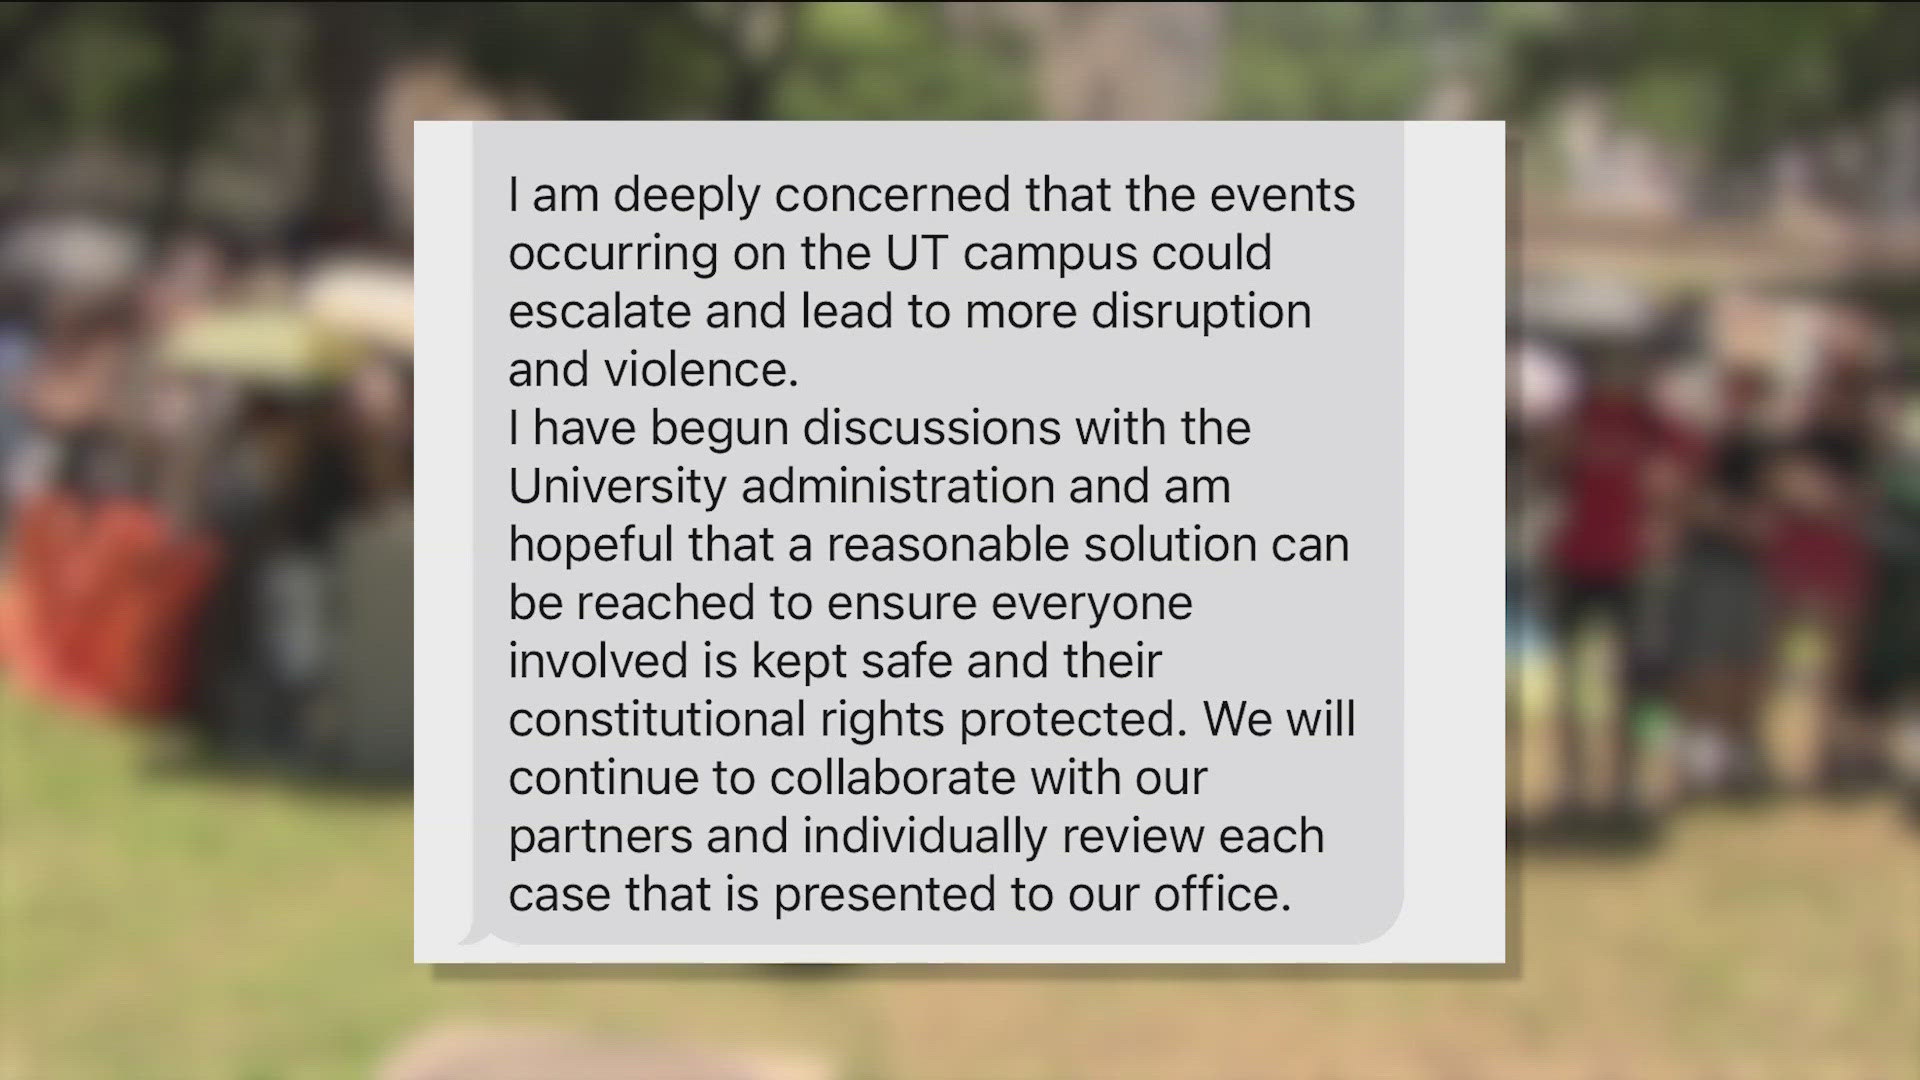 The Travis County attorney expressed her concerns Monday night, stating she has begun to speak with university administration about reaching a solution.